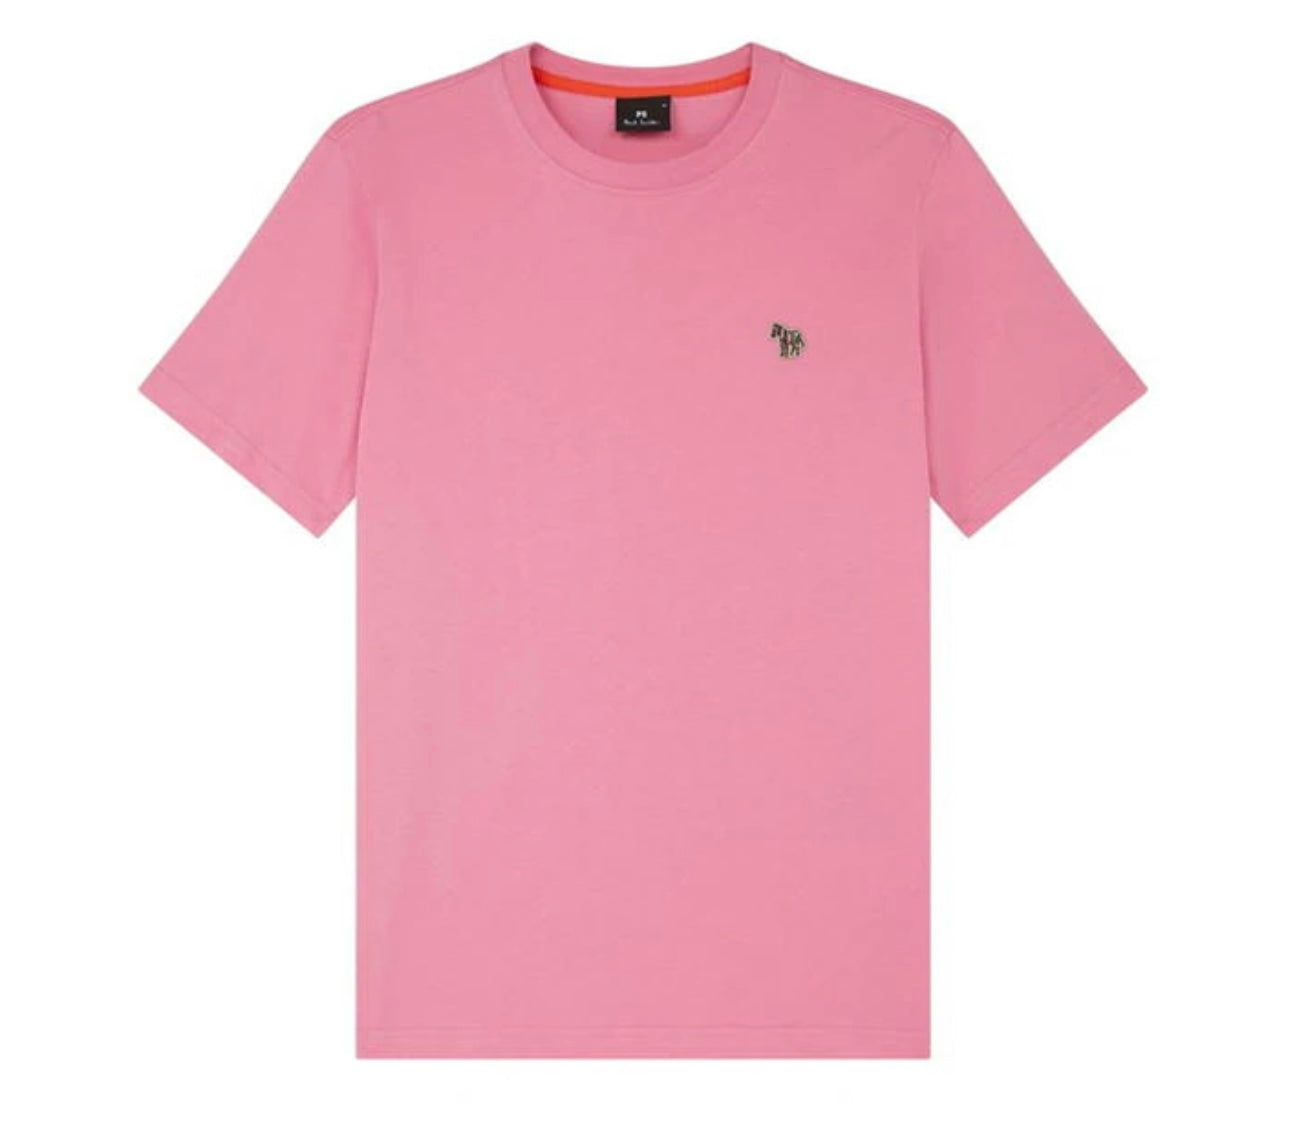 PAUL SMITH EMBROIDERED ZEBRA T-SHIRT PINK